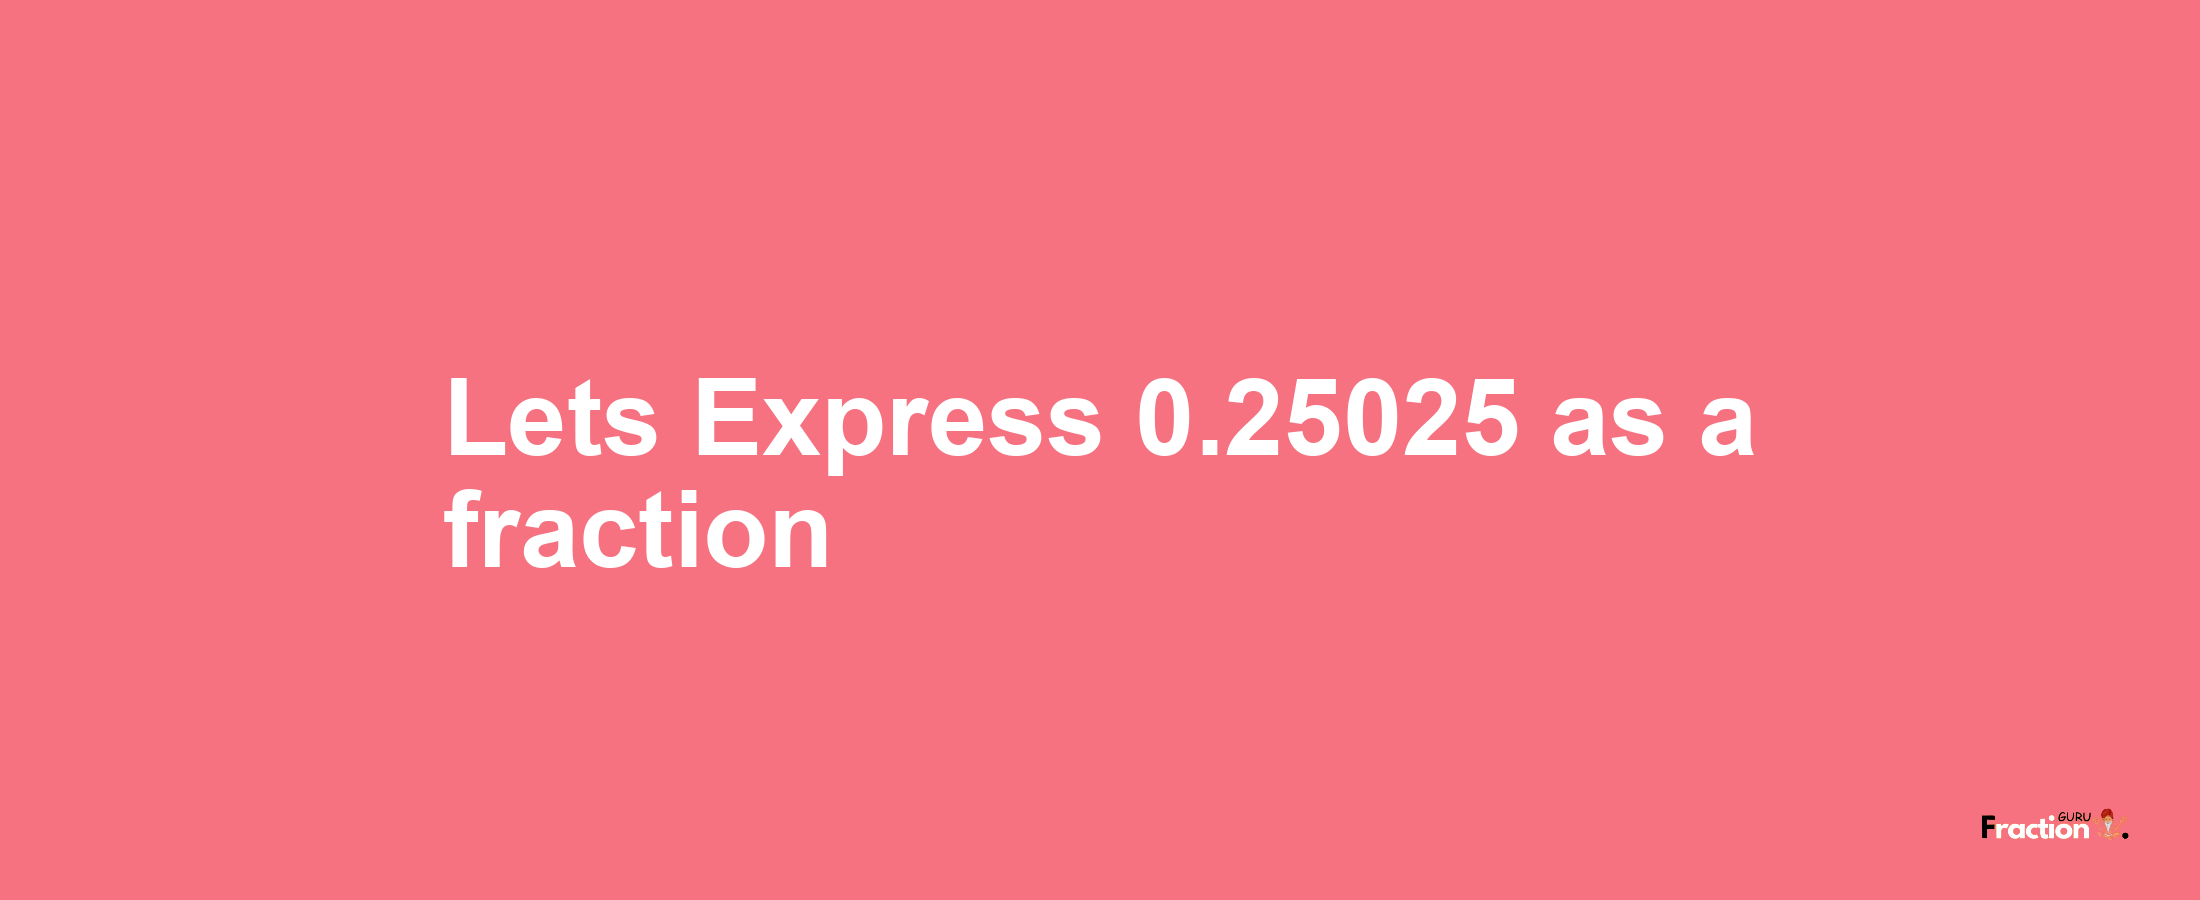 Lets Express 0.25025 as afraction